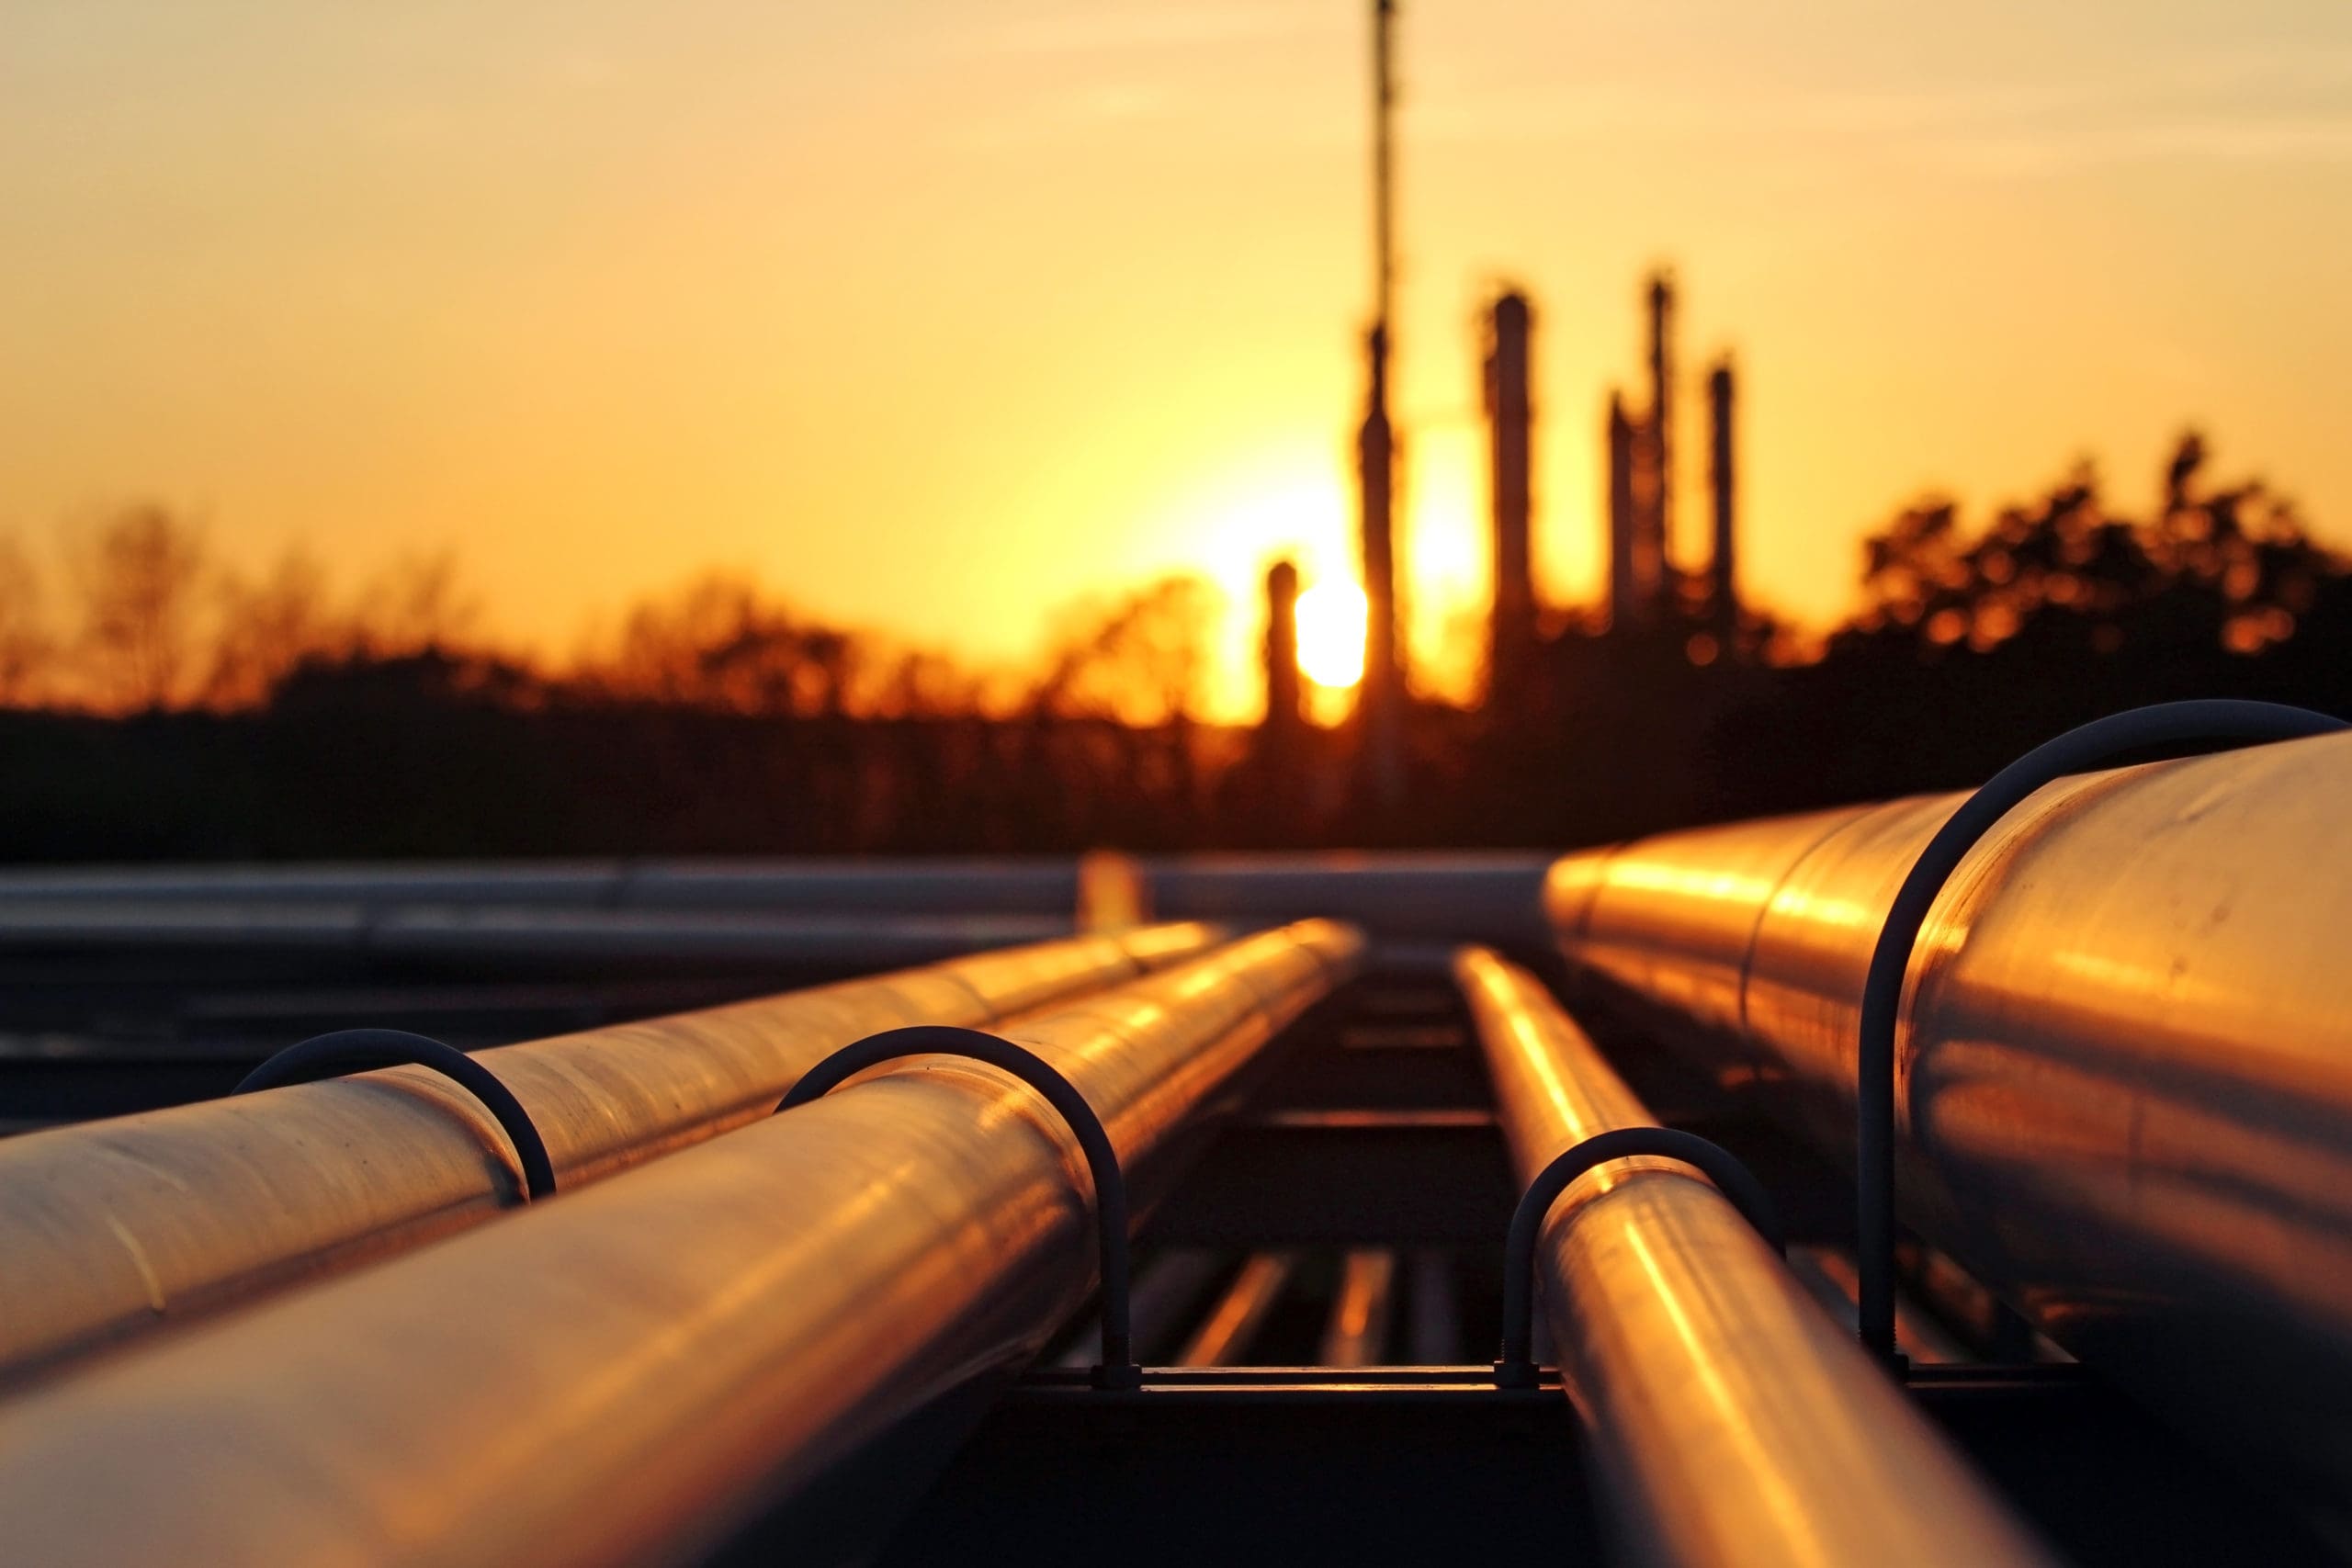 crude oil refinery during sunset with pipeline connection